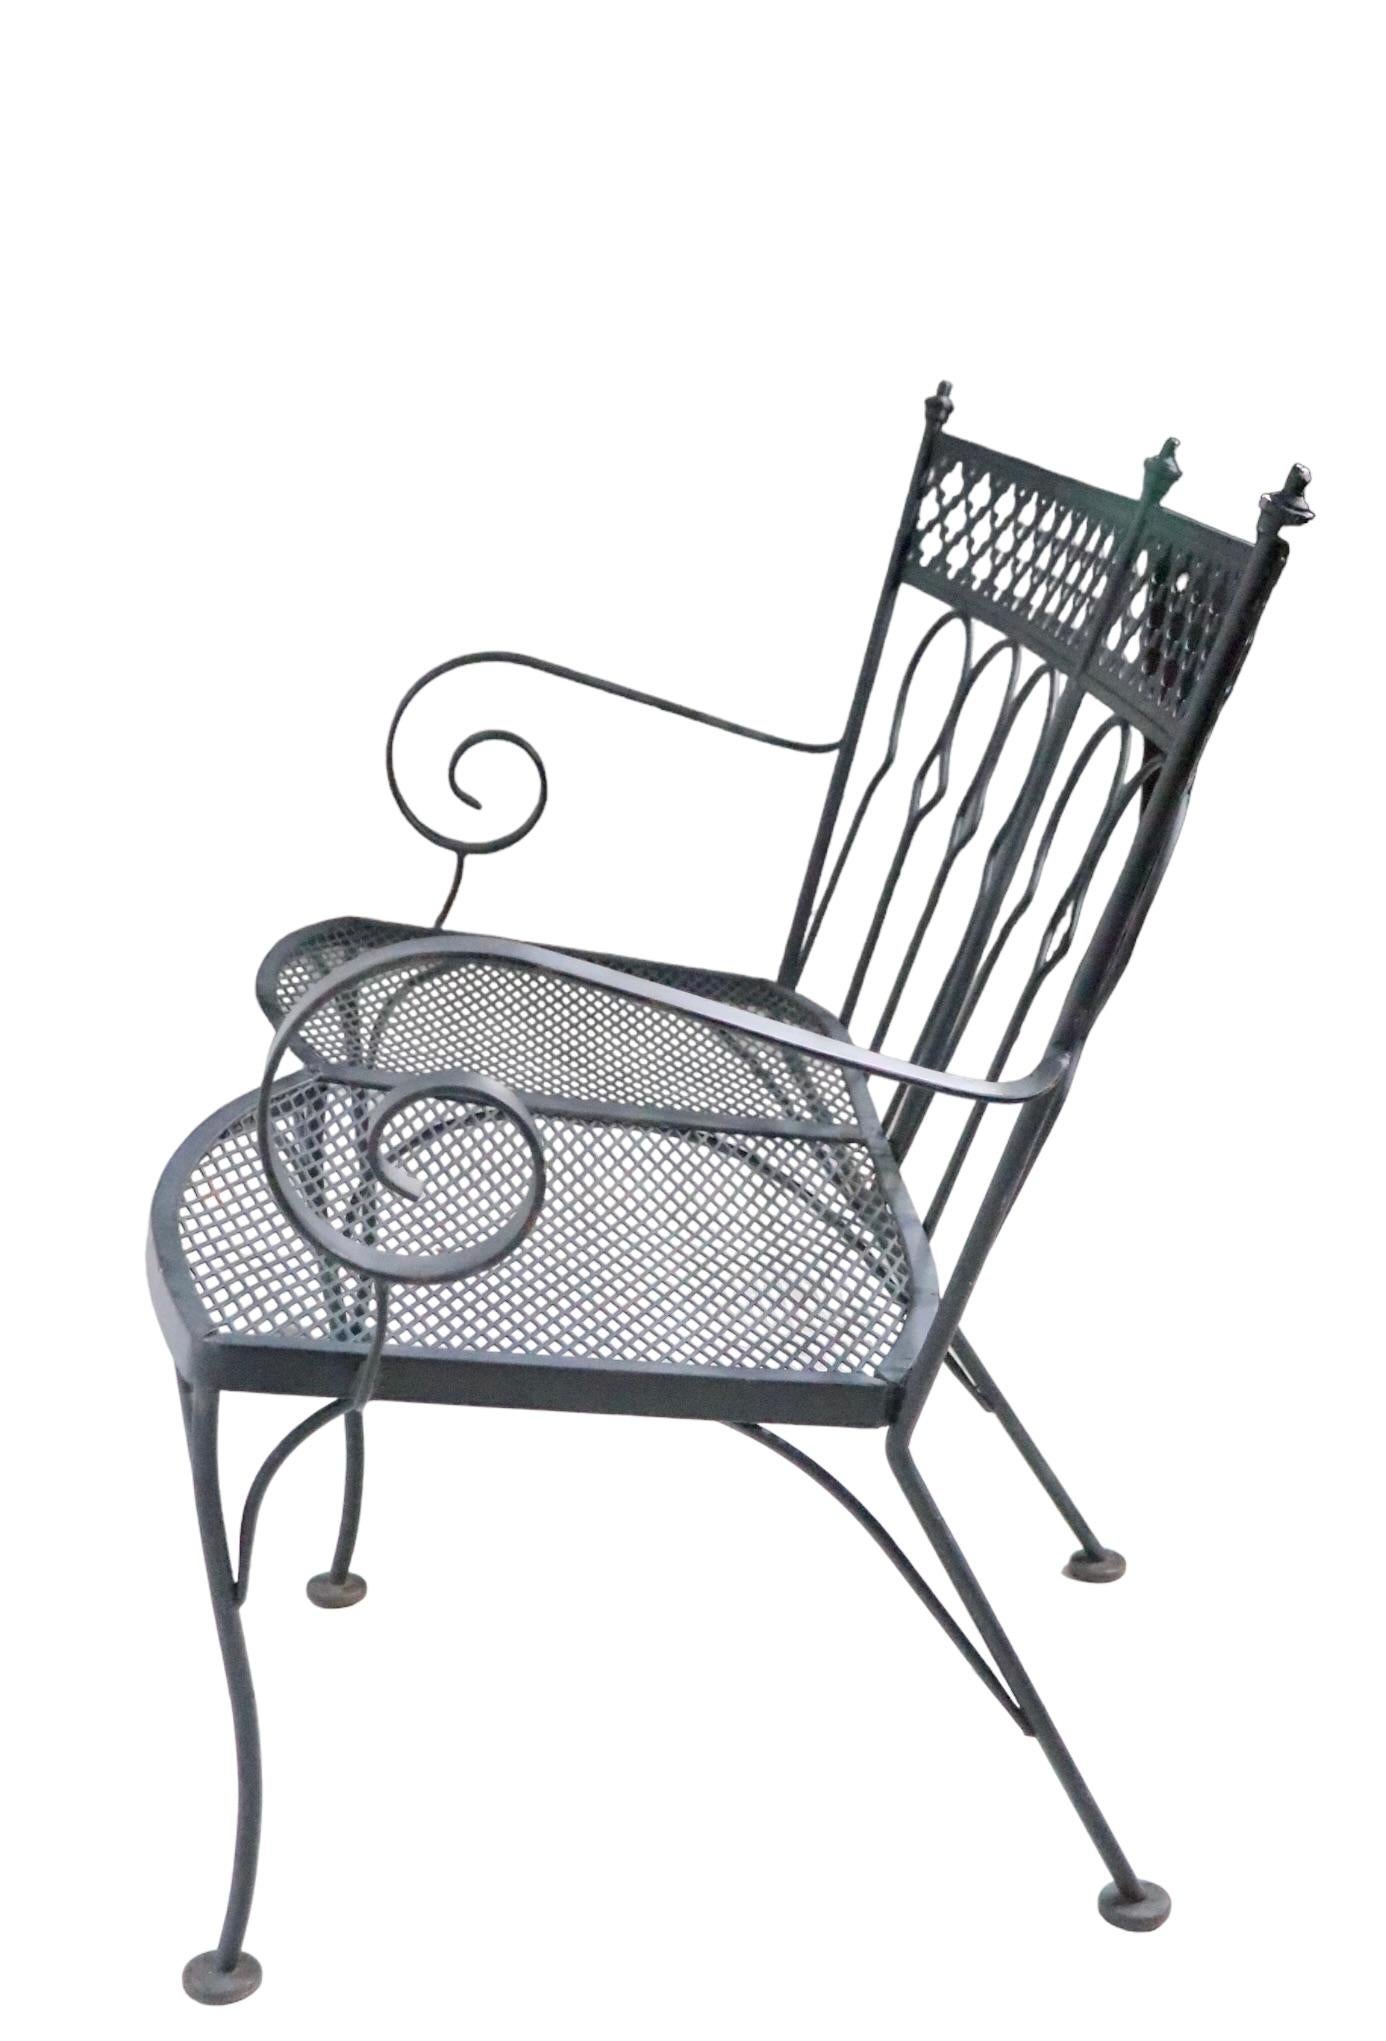 Rare Salterini bench, in the Taj Mahal pattern. The bench features a wrought iron frame, wrought iron back supports, decorative cast metal finials, and a metal mesh seat.
 This pattern is not often seen on the market, and the bench is even more